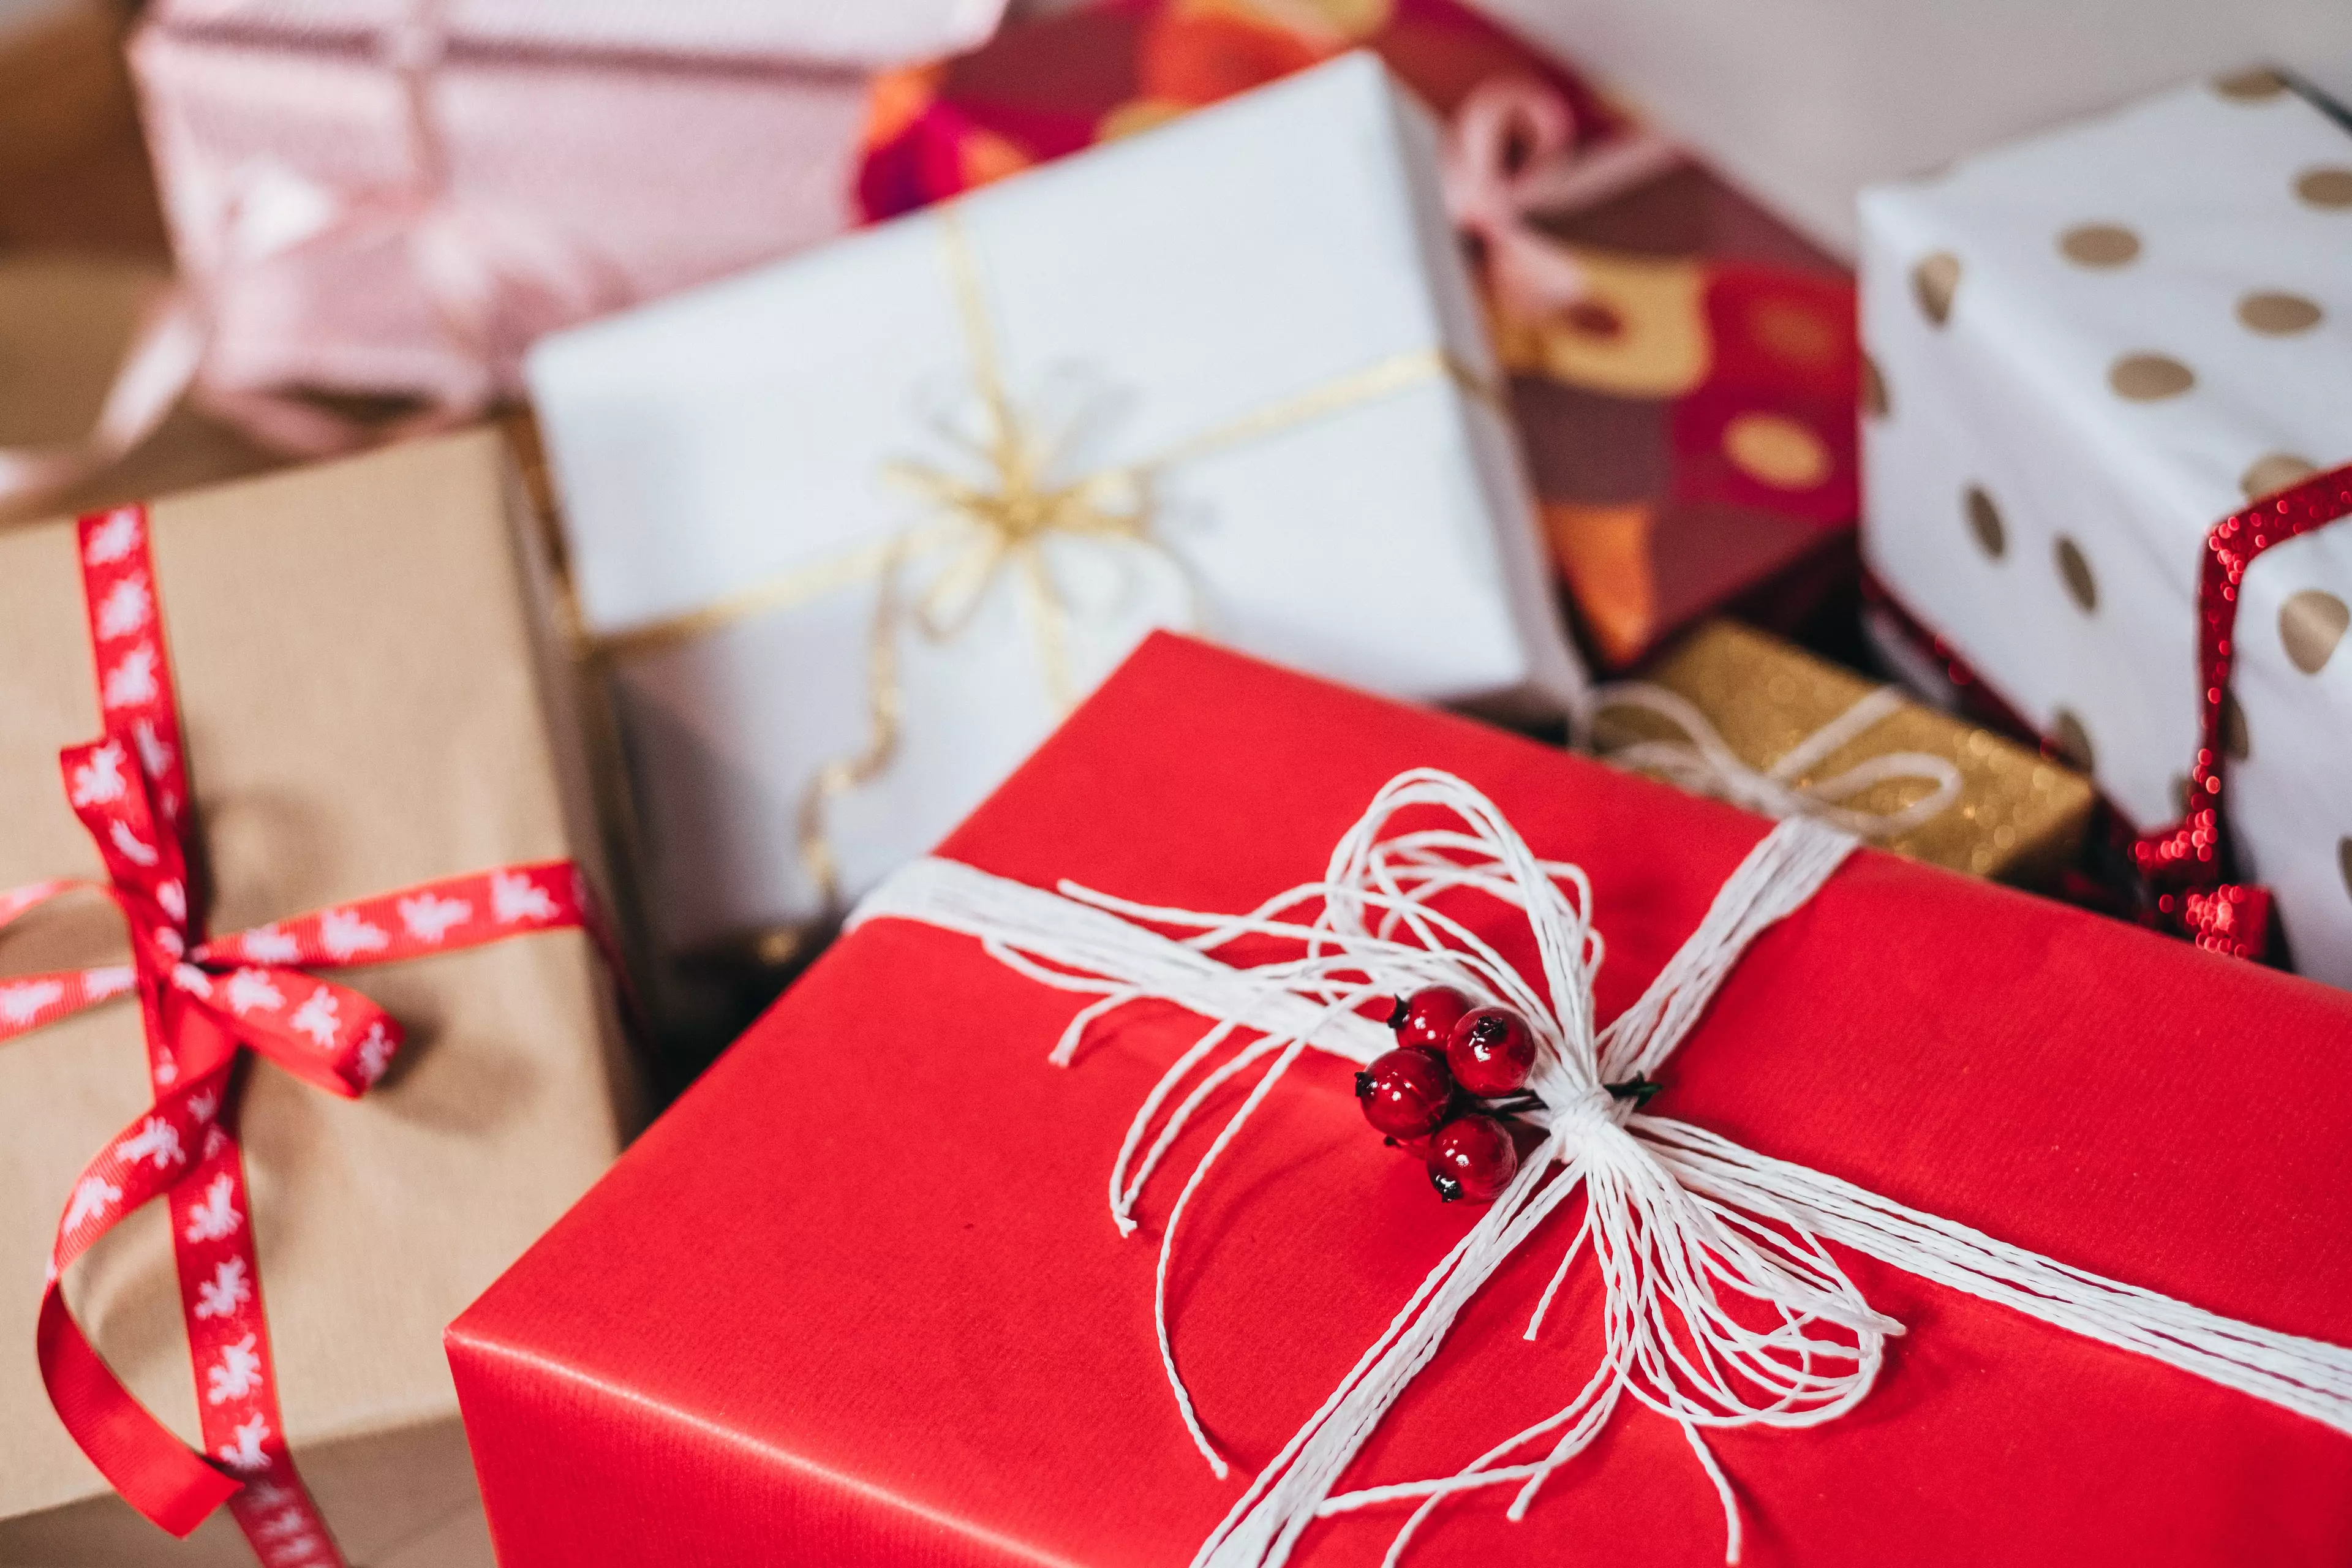 Your presents could be given to someone who needs them (